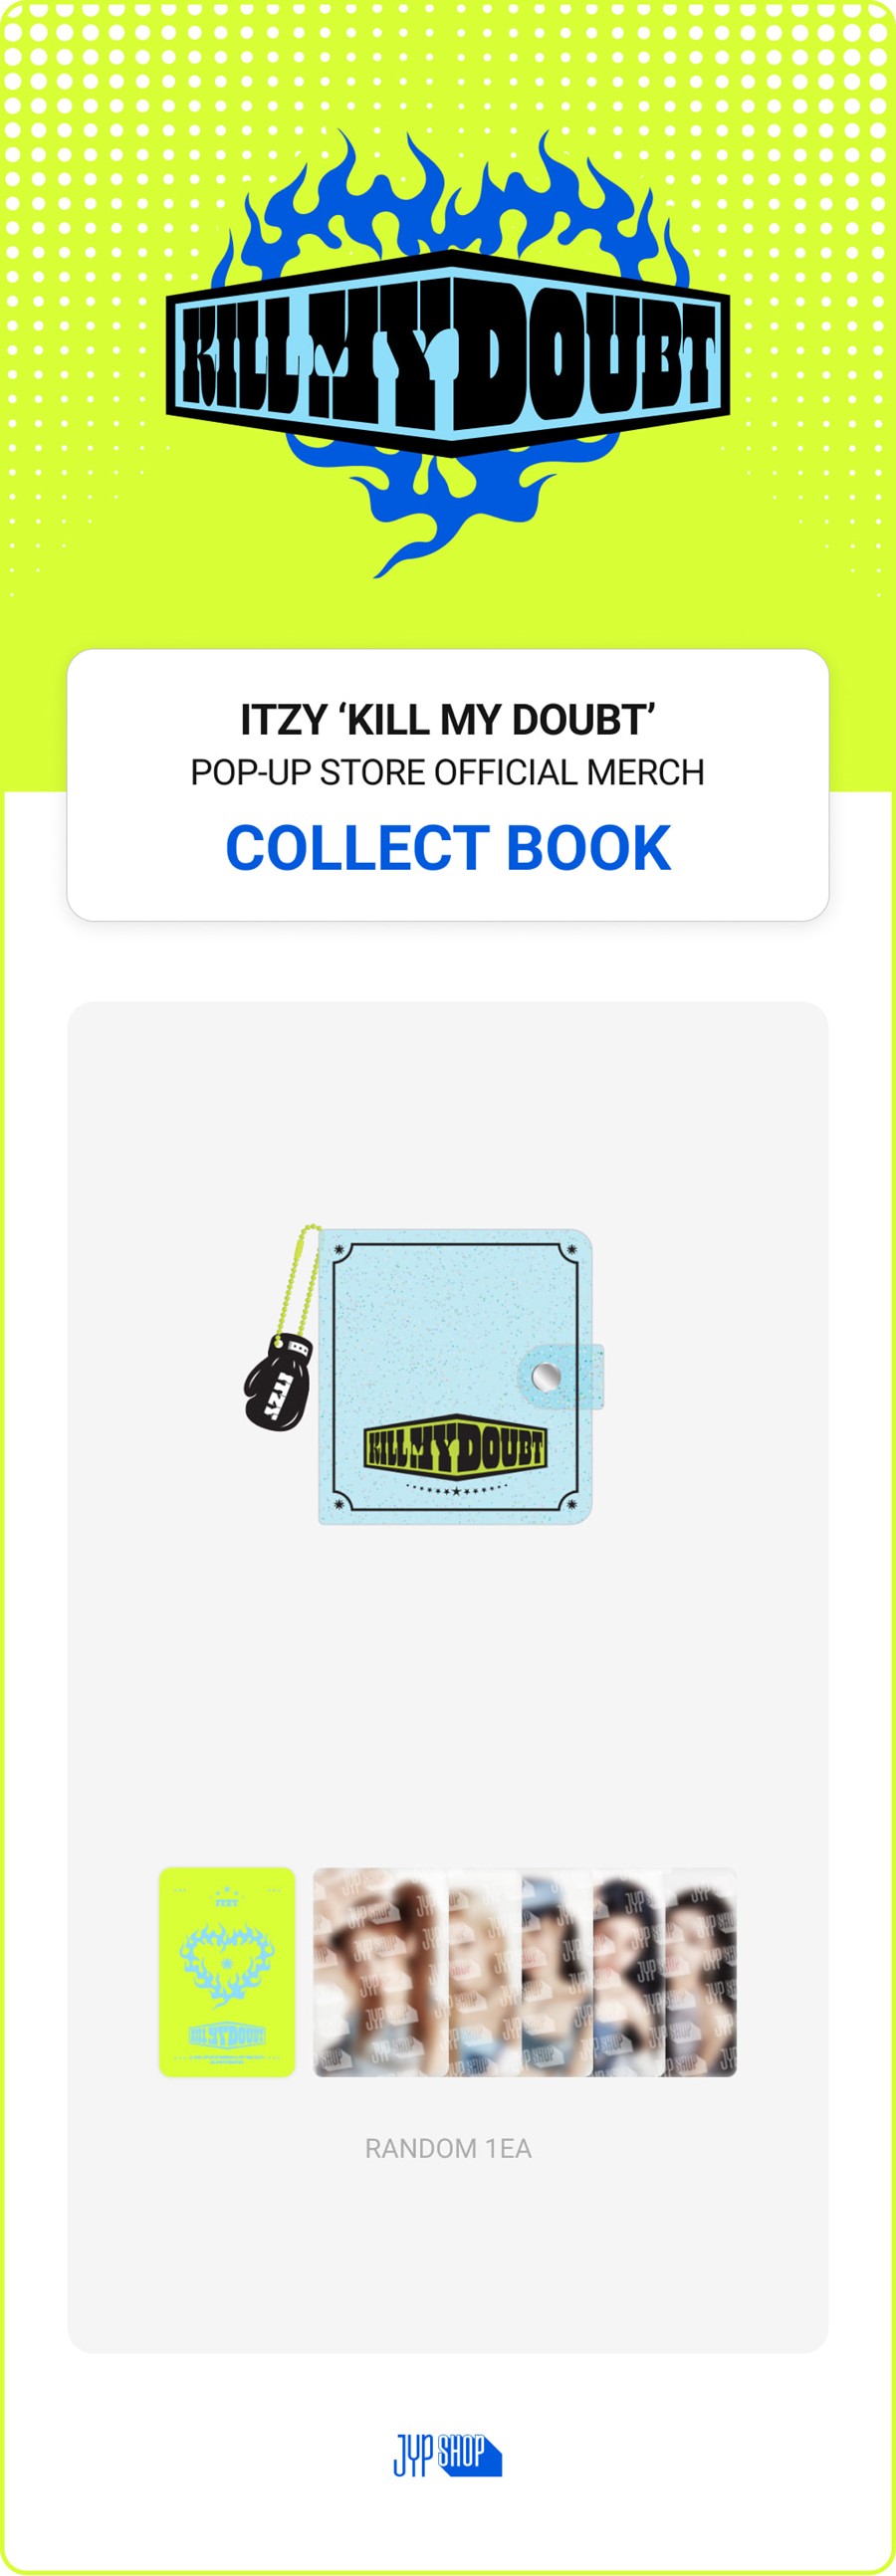 itzy-kill-my-doubt-pop-up-store-official-merch-collect-book-wholesales